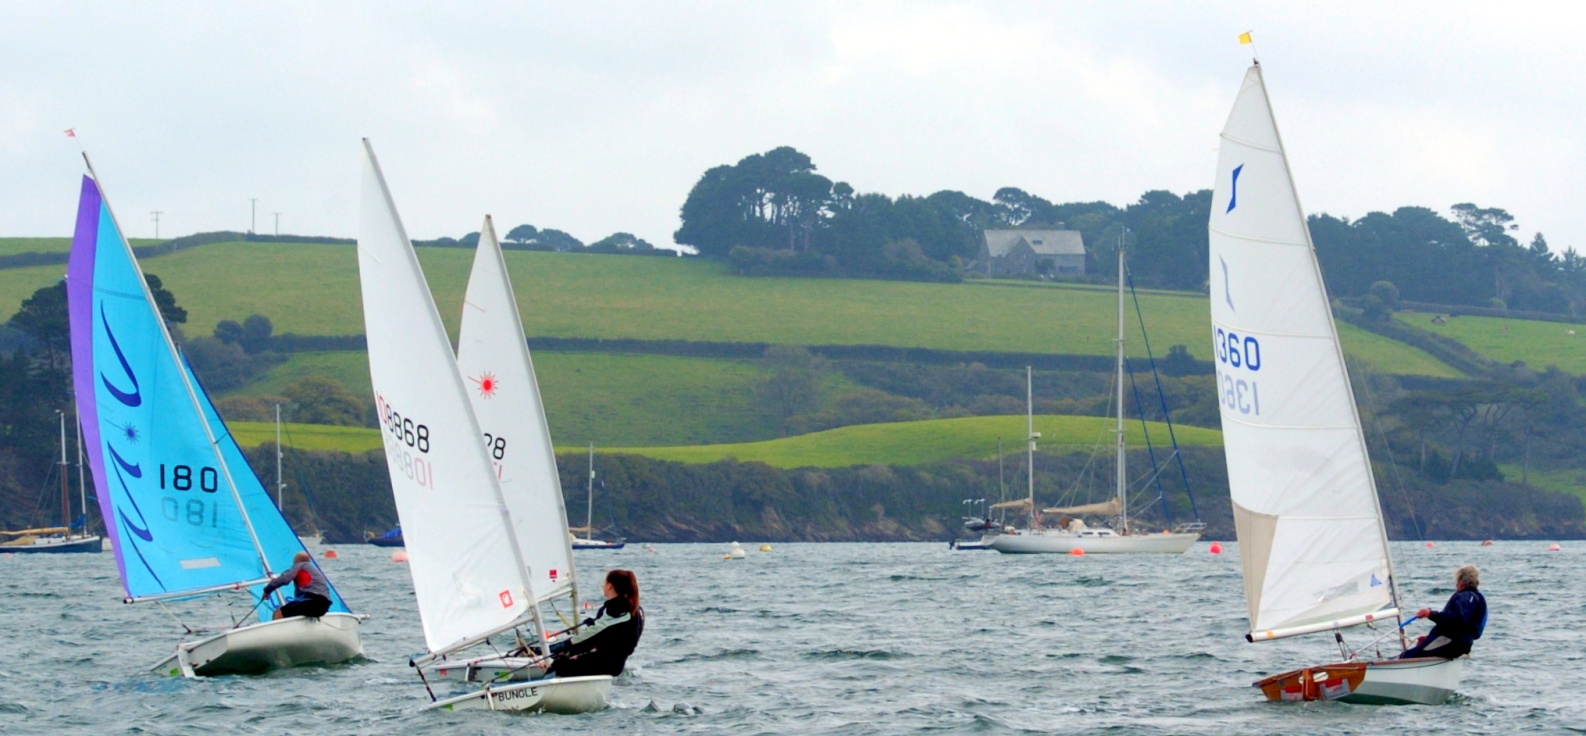 Dinghy Racing: October 4th